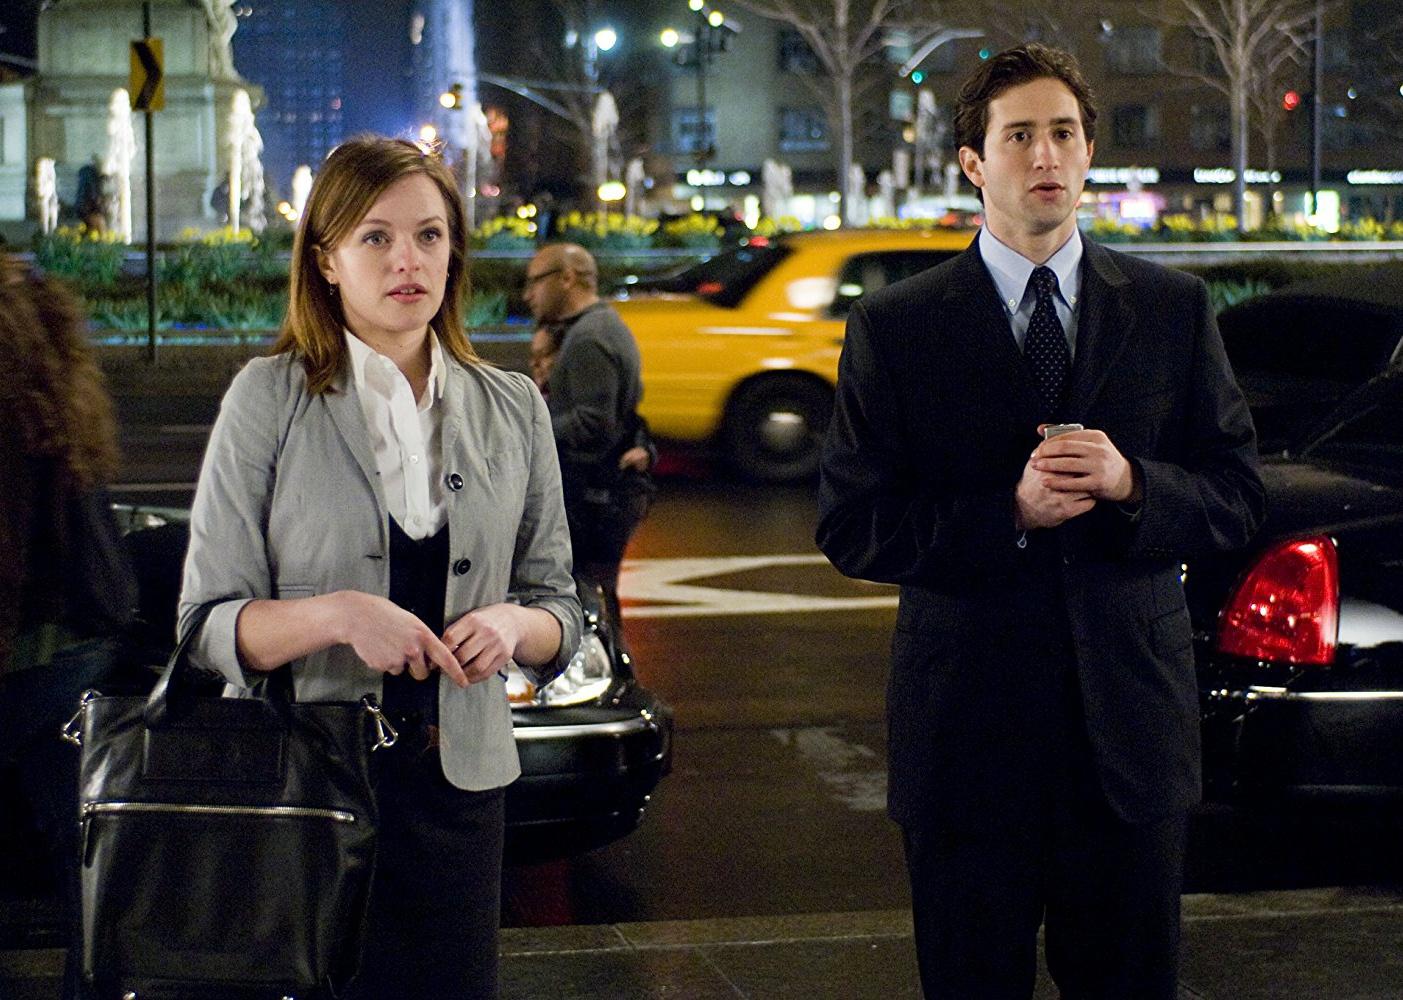 Elizabeth Moss standing near a busy street with a man in a suit.